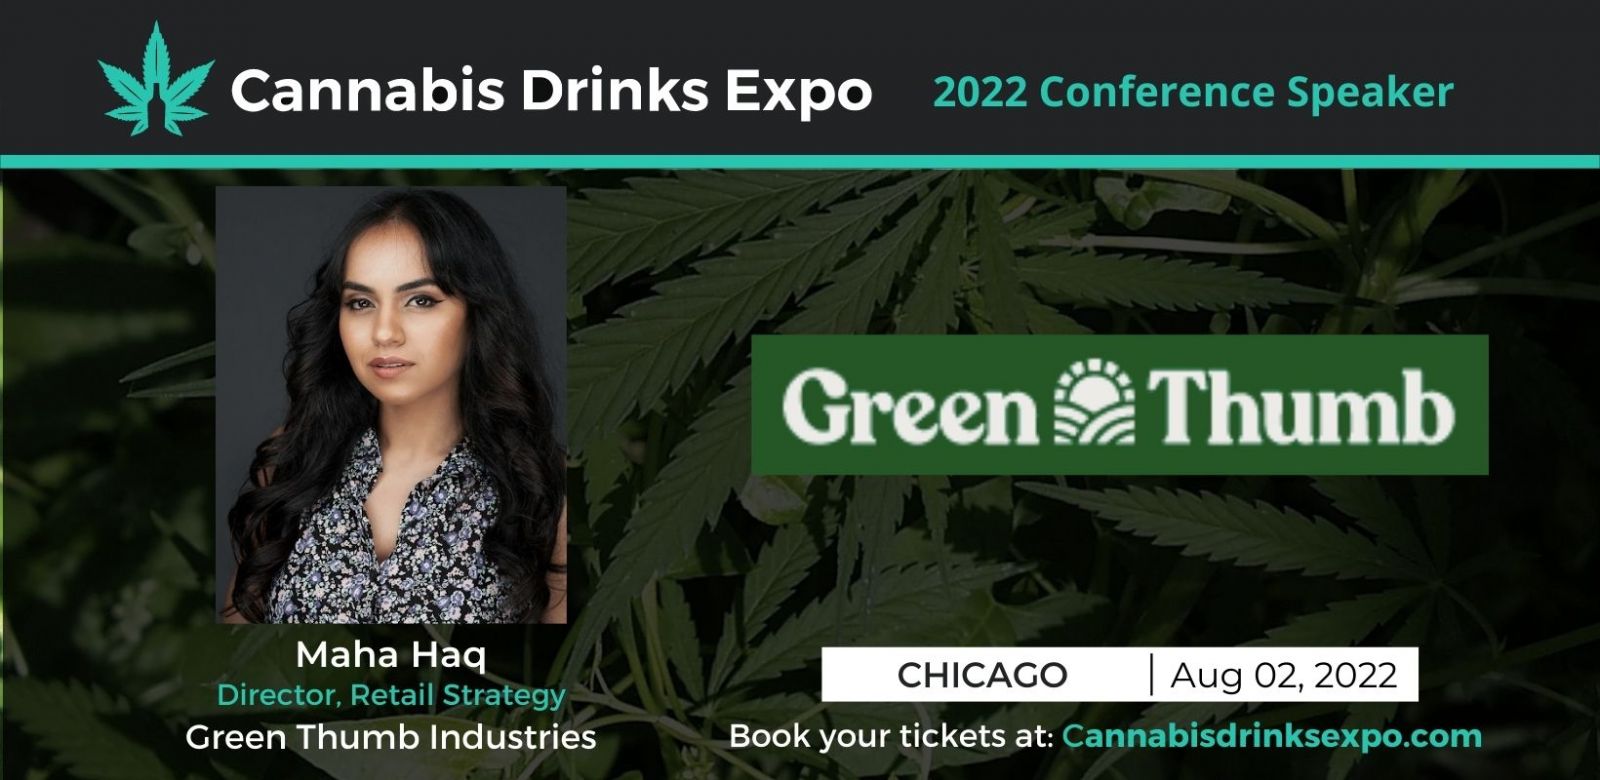 Photo for: Maha Haq, Director, Retail Strategy at Green Thumb Industries To Speak at 2022 CDE, Chicago.